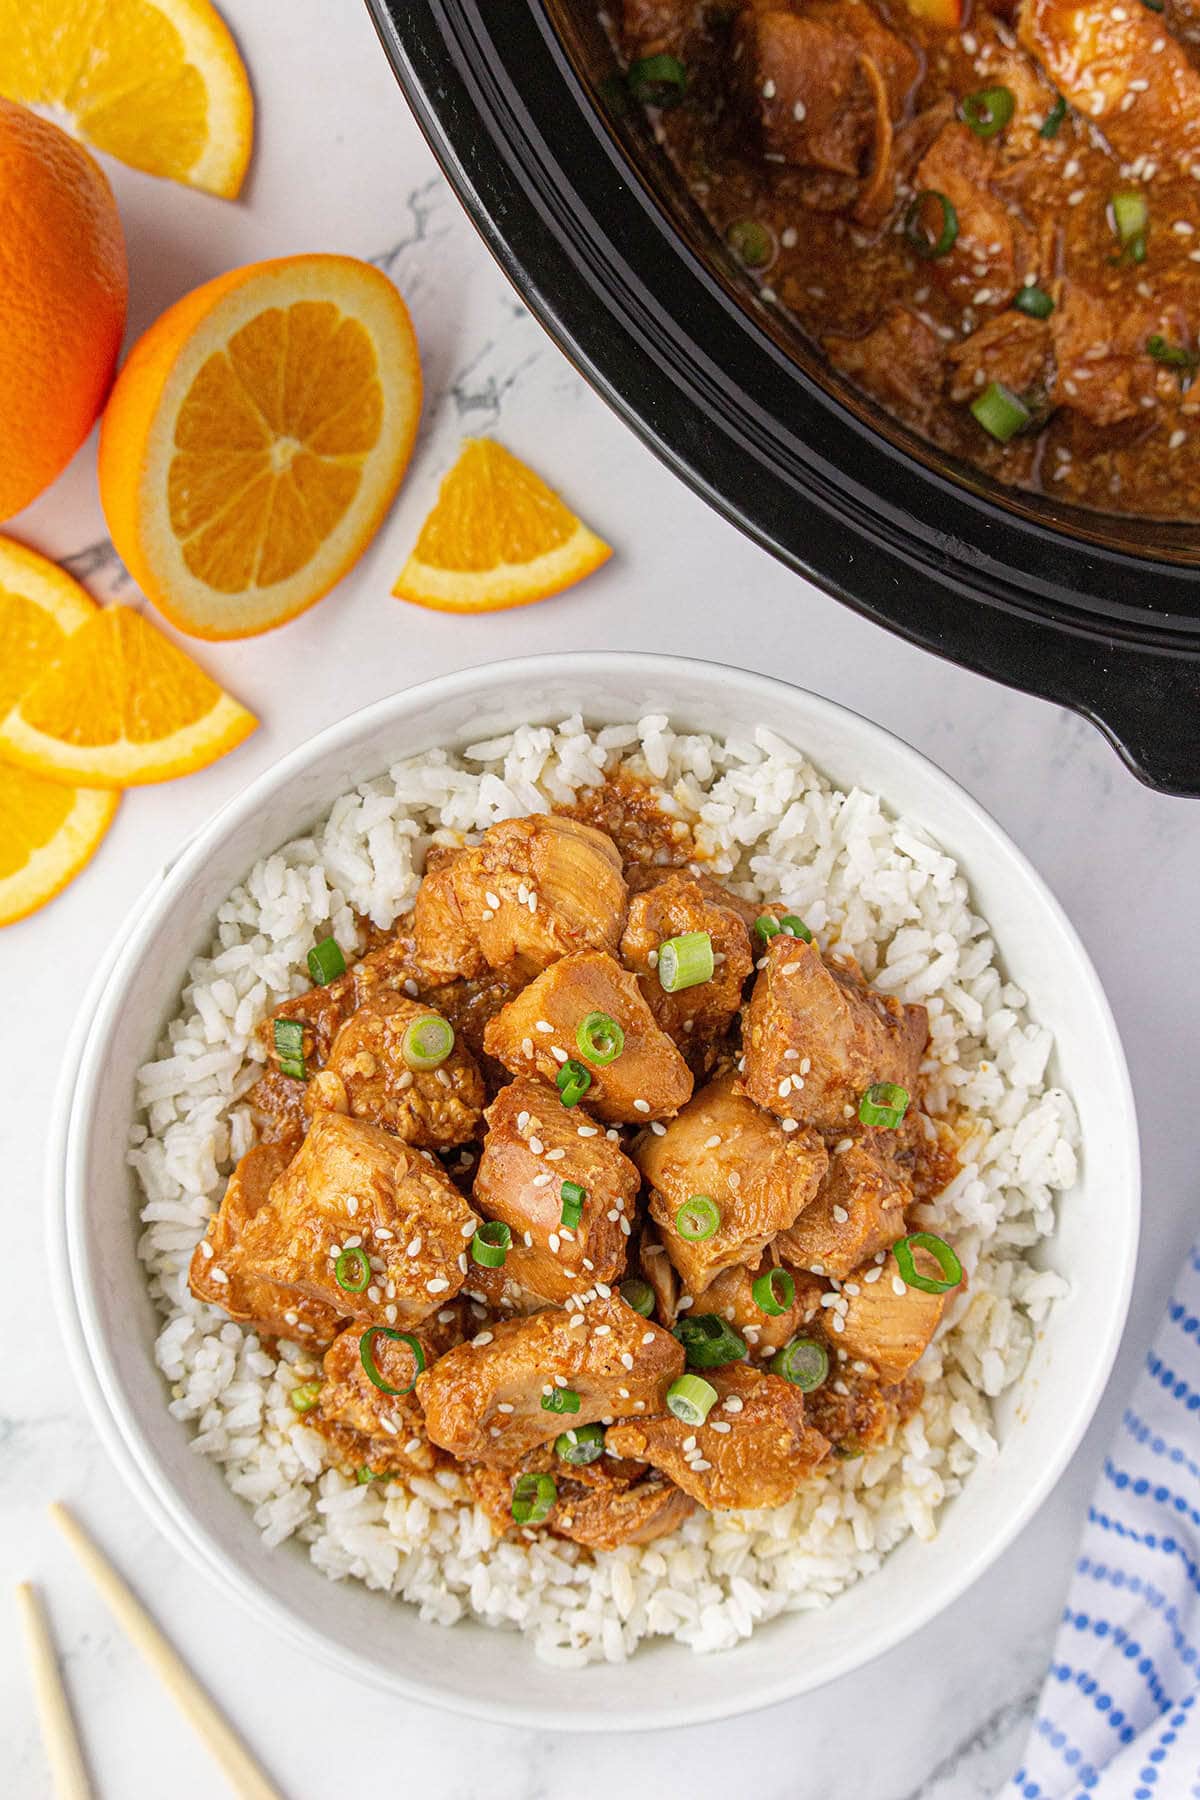 Bowl of slow cooker orange chicken over rice.